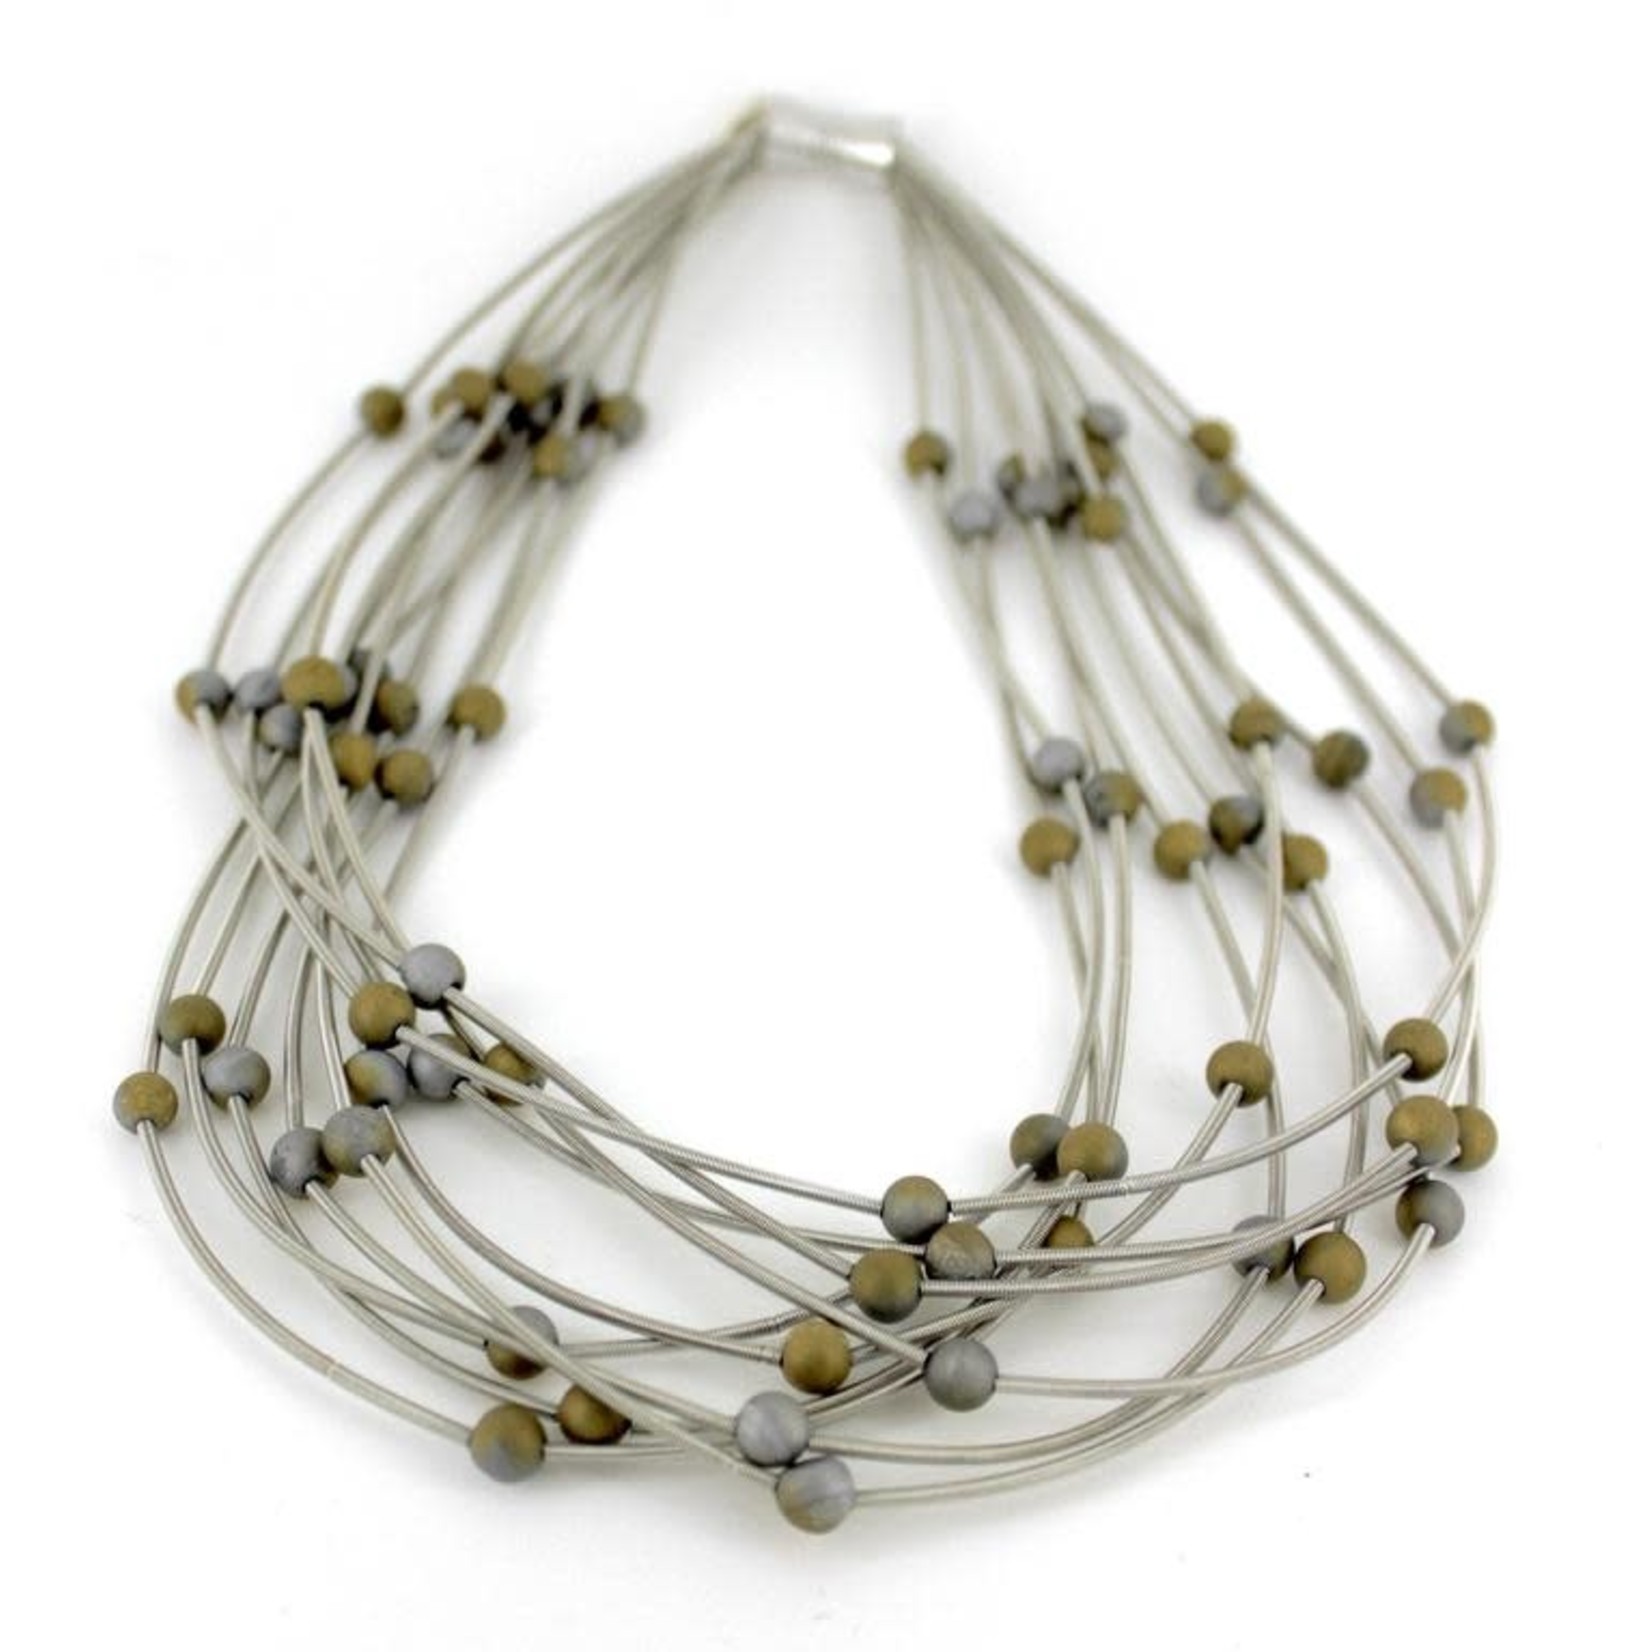 Sea Lily Silver PW 10 Layer Necklace w/Silver-Gold Geodes